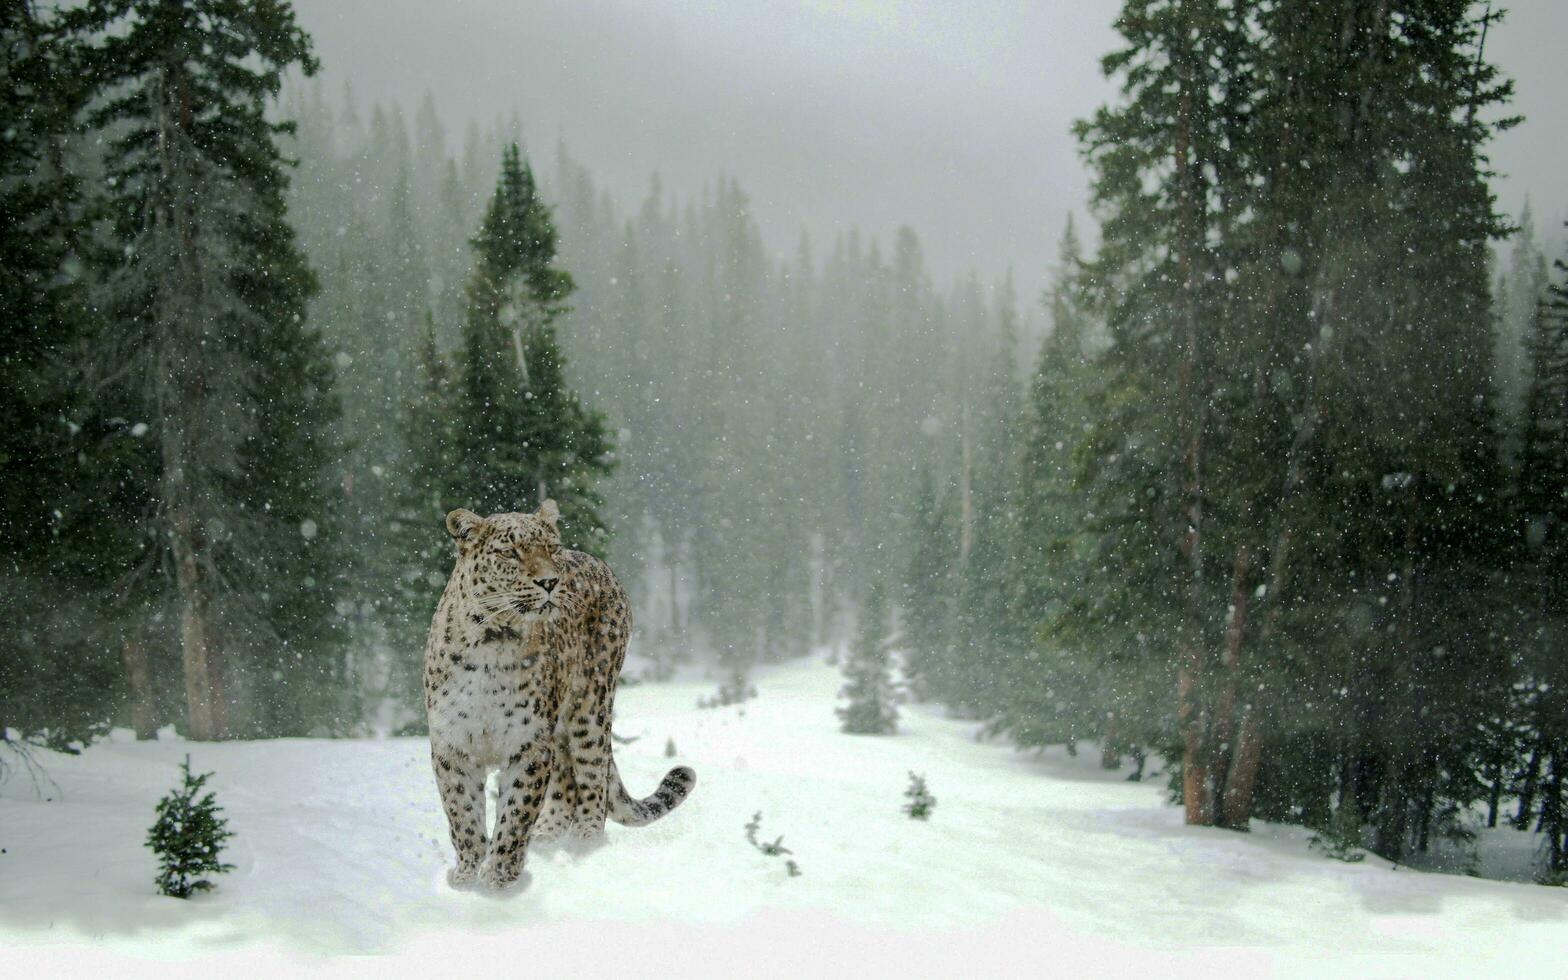 The tigers of the snow forest are very beautiful to look at photo